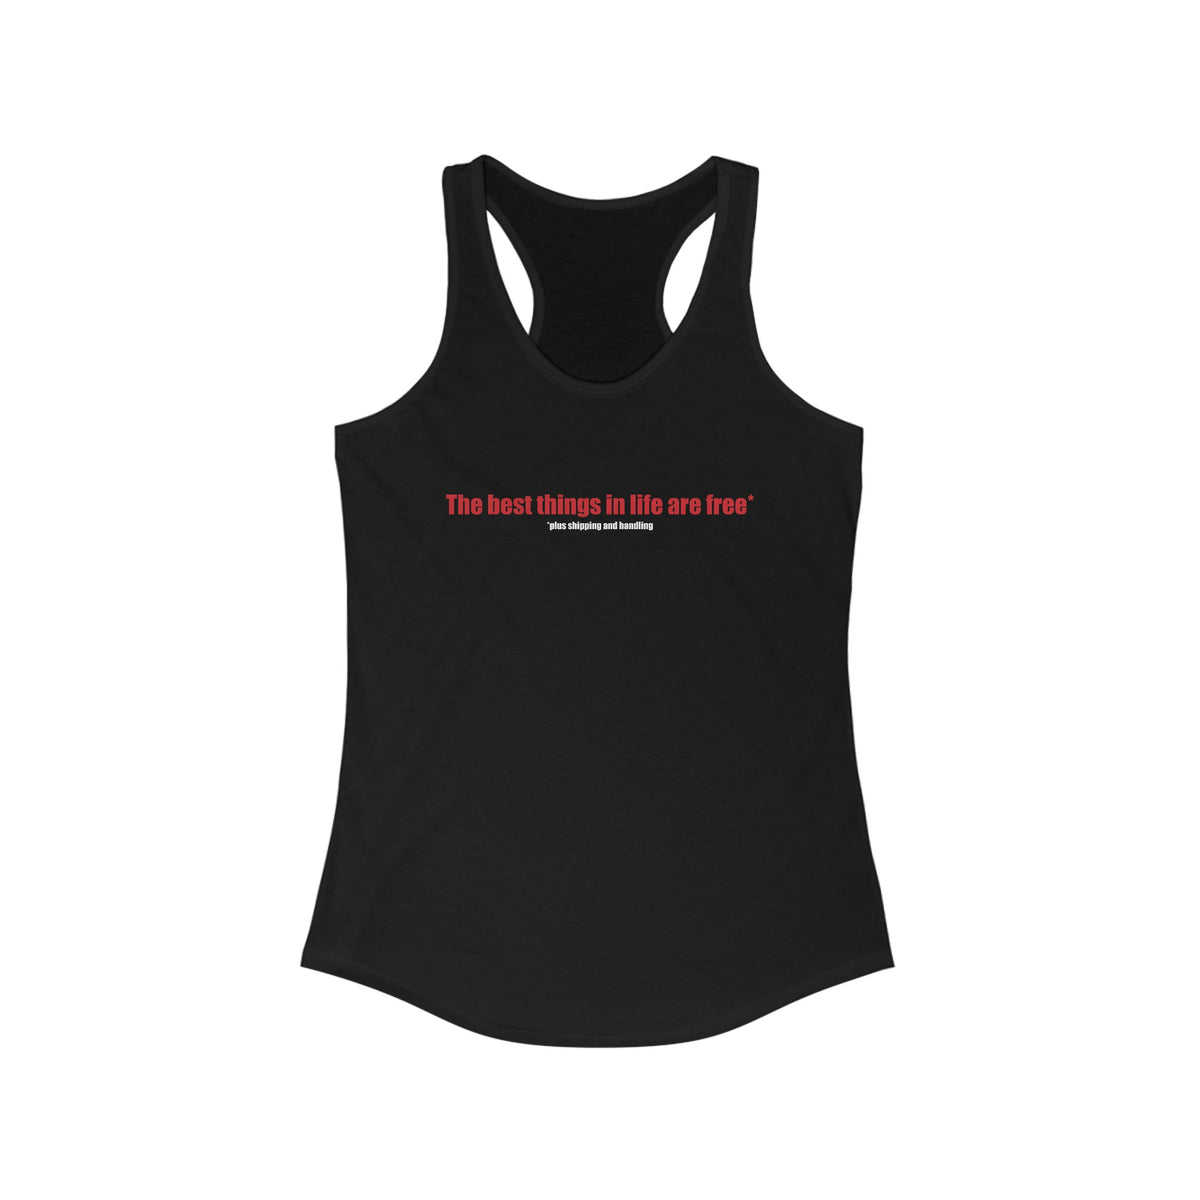 The Best Things In Life (Plus Shipping And Handling) - Women’s Racerback Tank